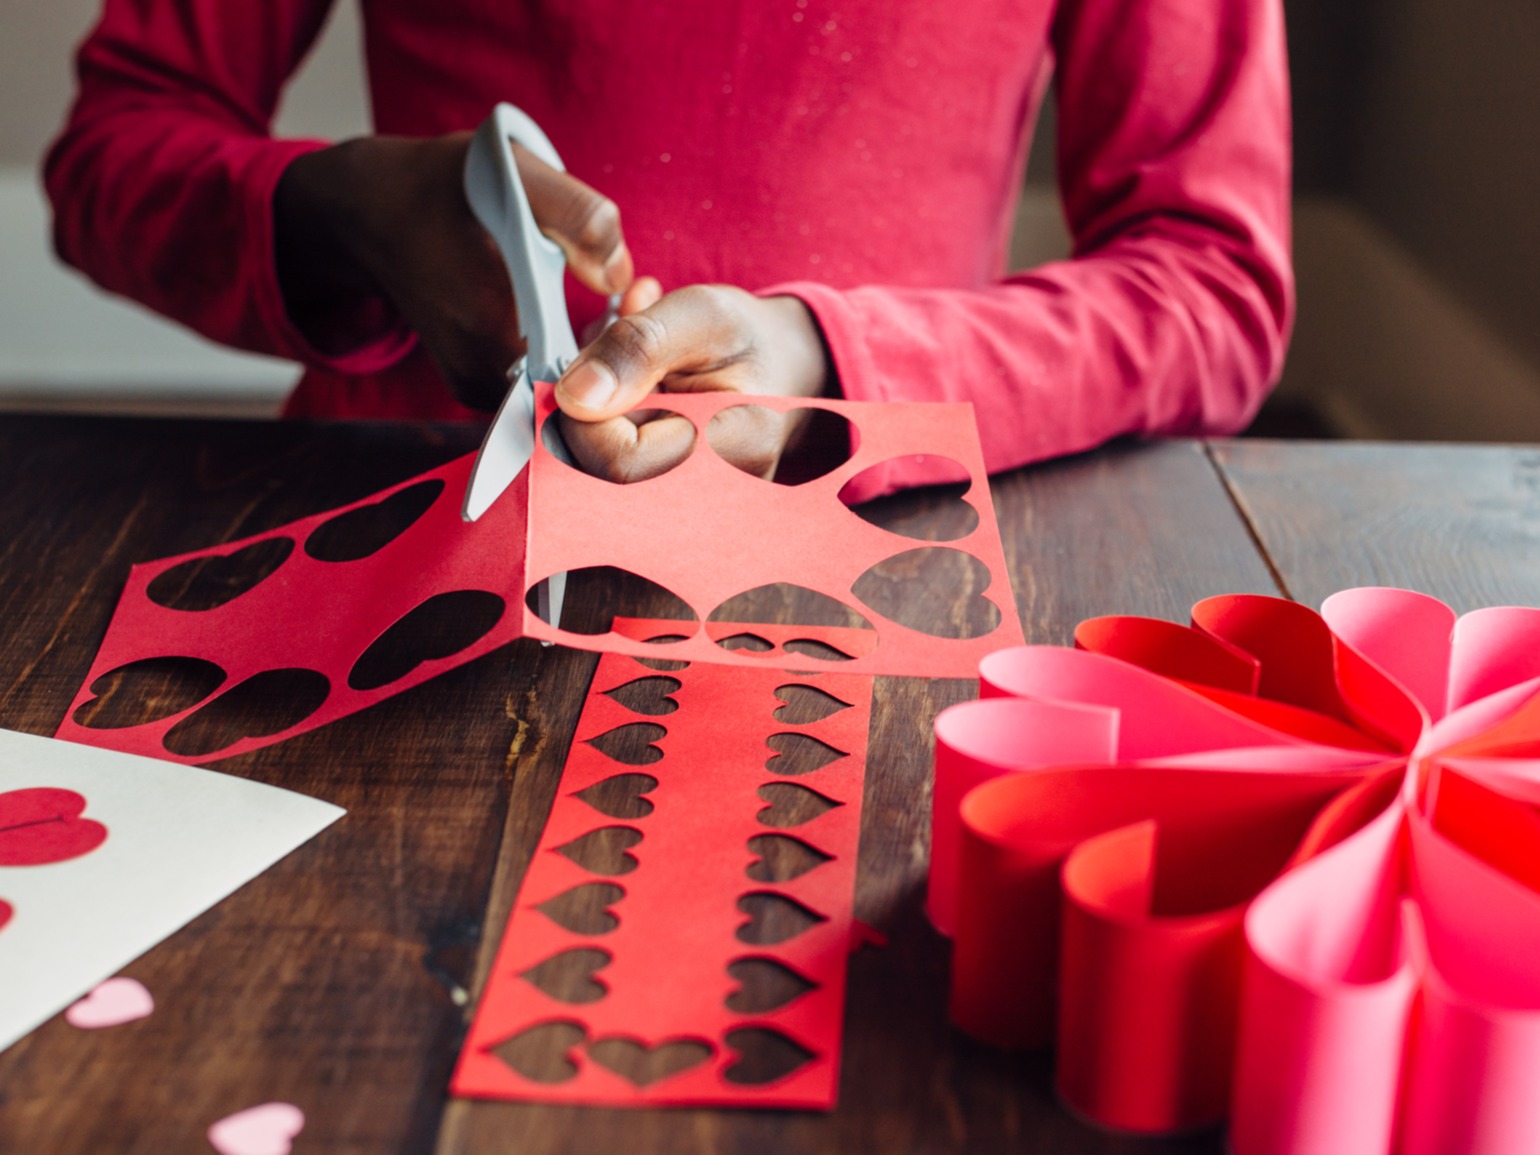 Kid cutting out red paper hearts at table